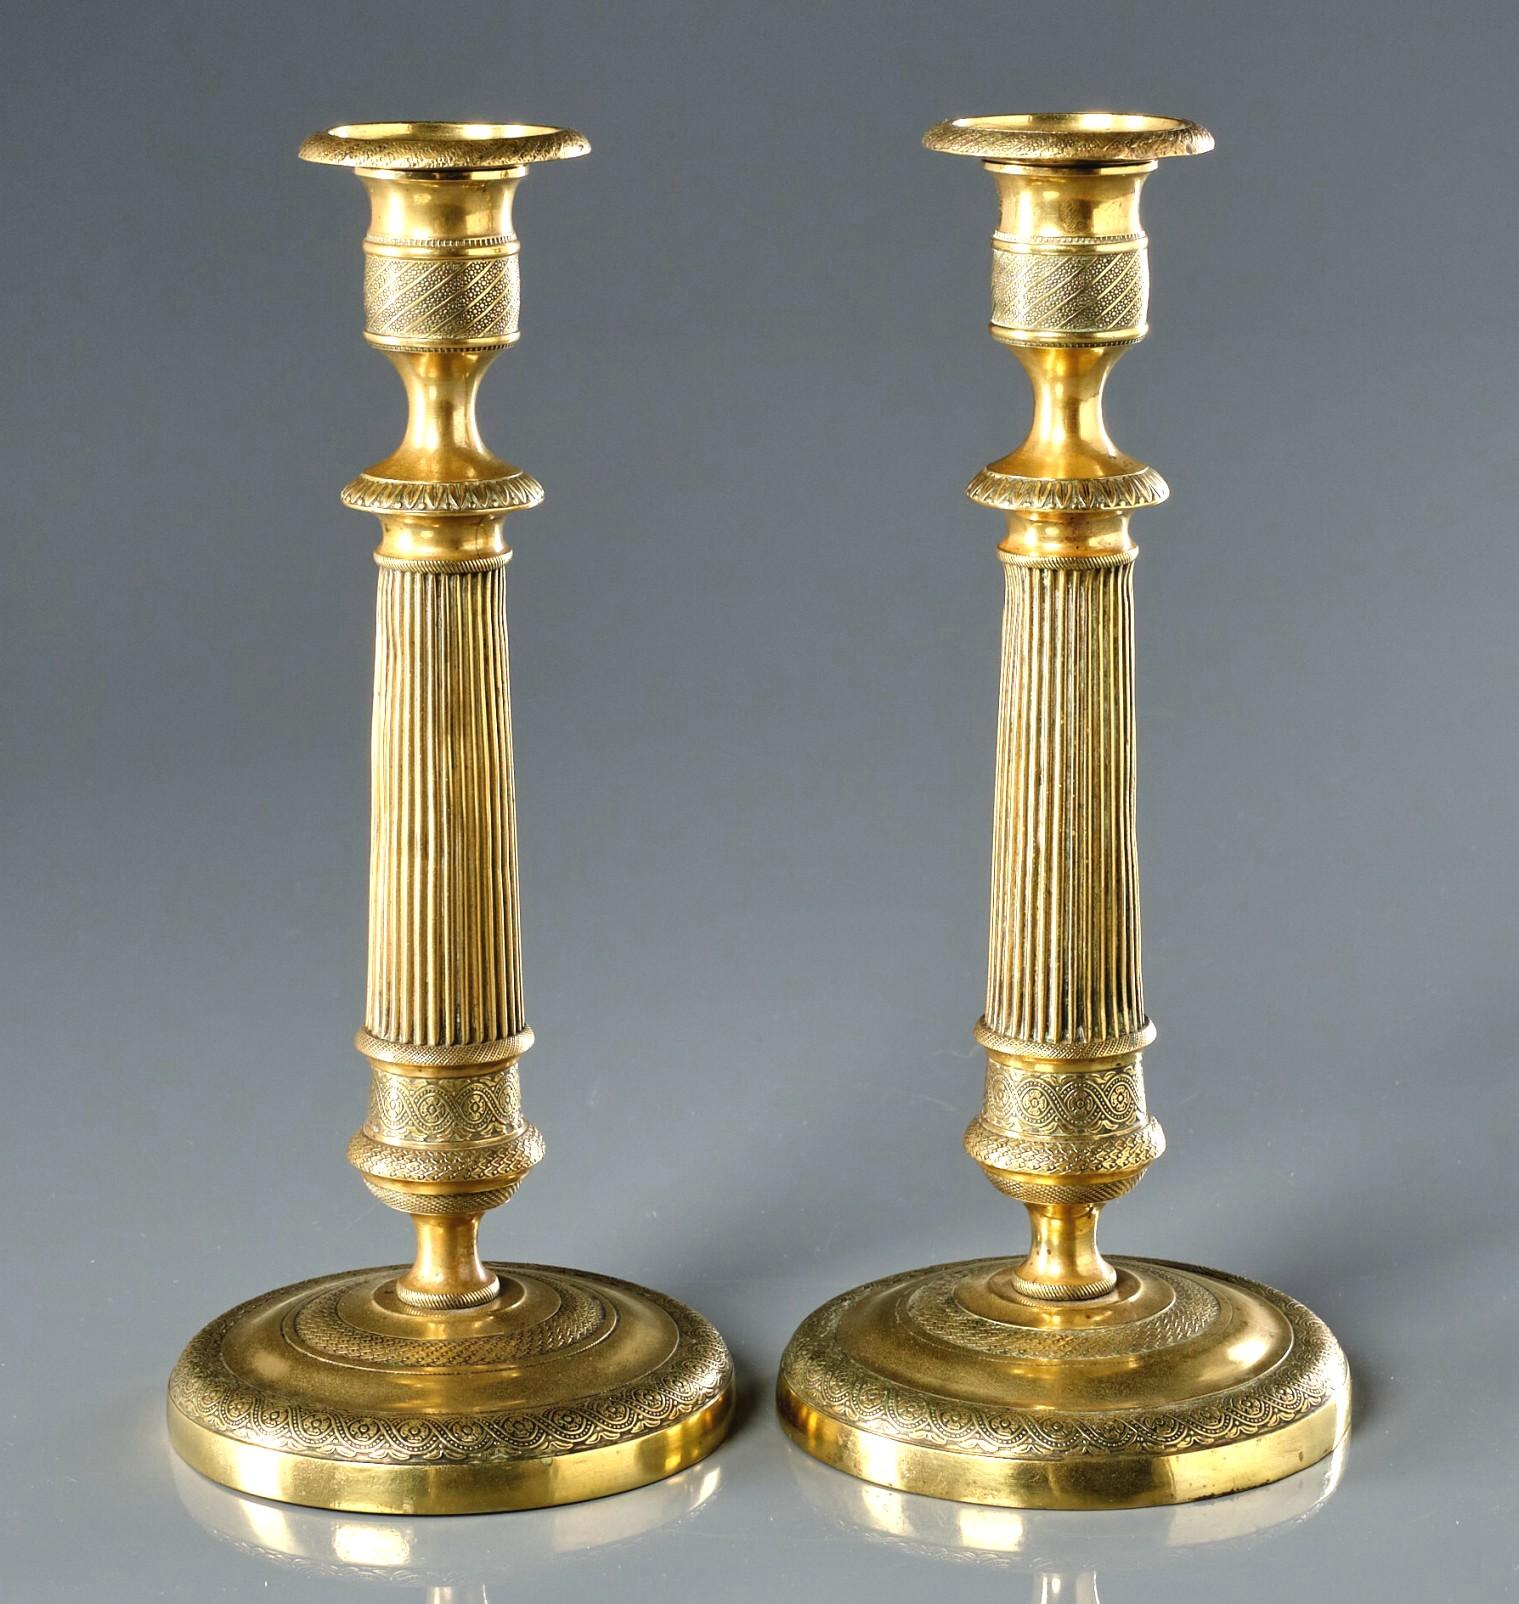 A very handsome & tall pair of early 19th century French Empire gilt brass candlesticks. 
Both showing reeded columns rising up from circular bases decorated by hand with finely chiseled motifs, to similarly addressed urn-shaped nozzles with